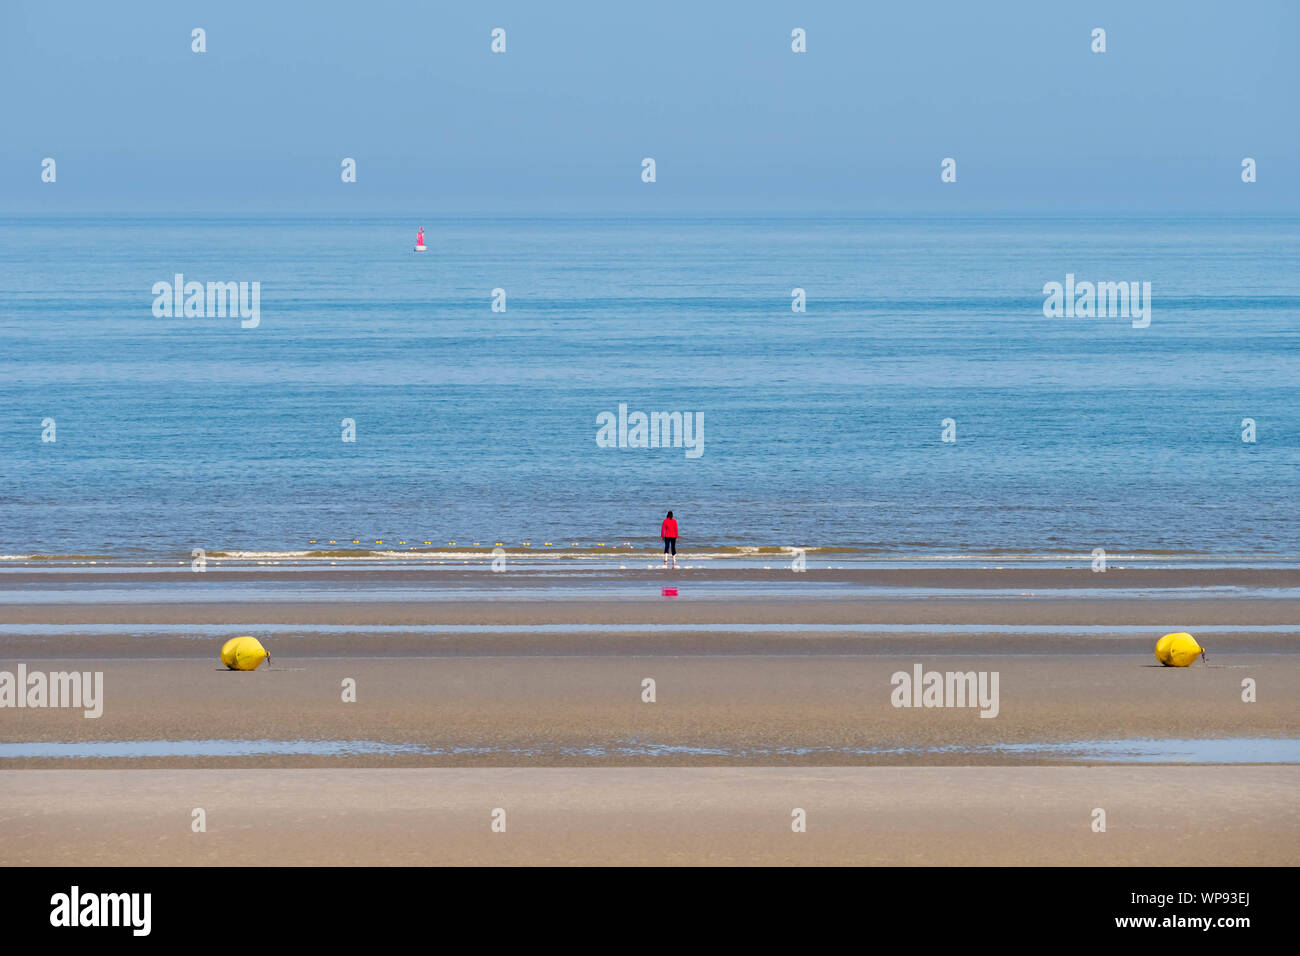 One woman in the distance enjoying an empty beach and the view across the ocean at Bray-Dunes in France Stock Photo